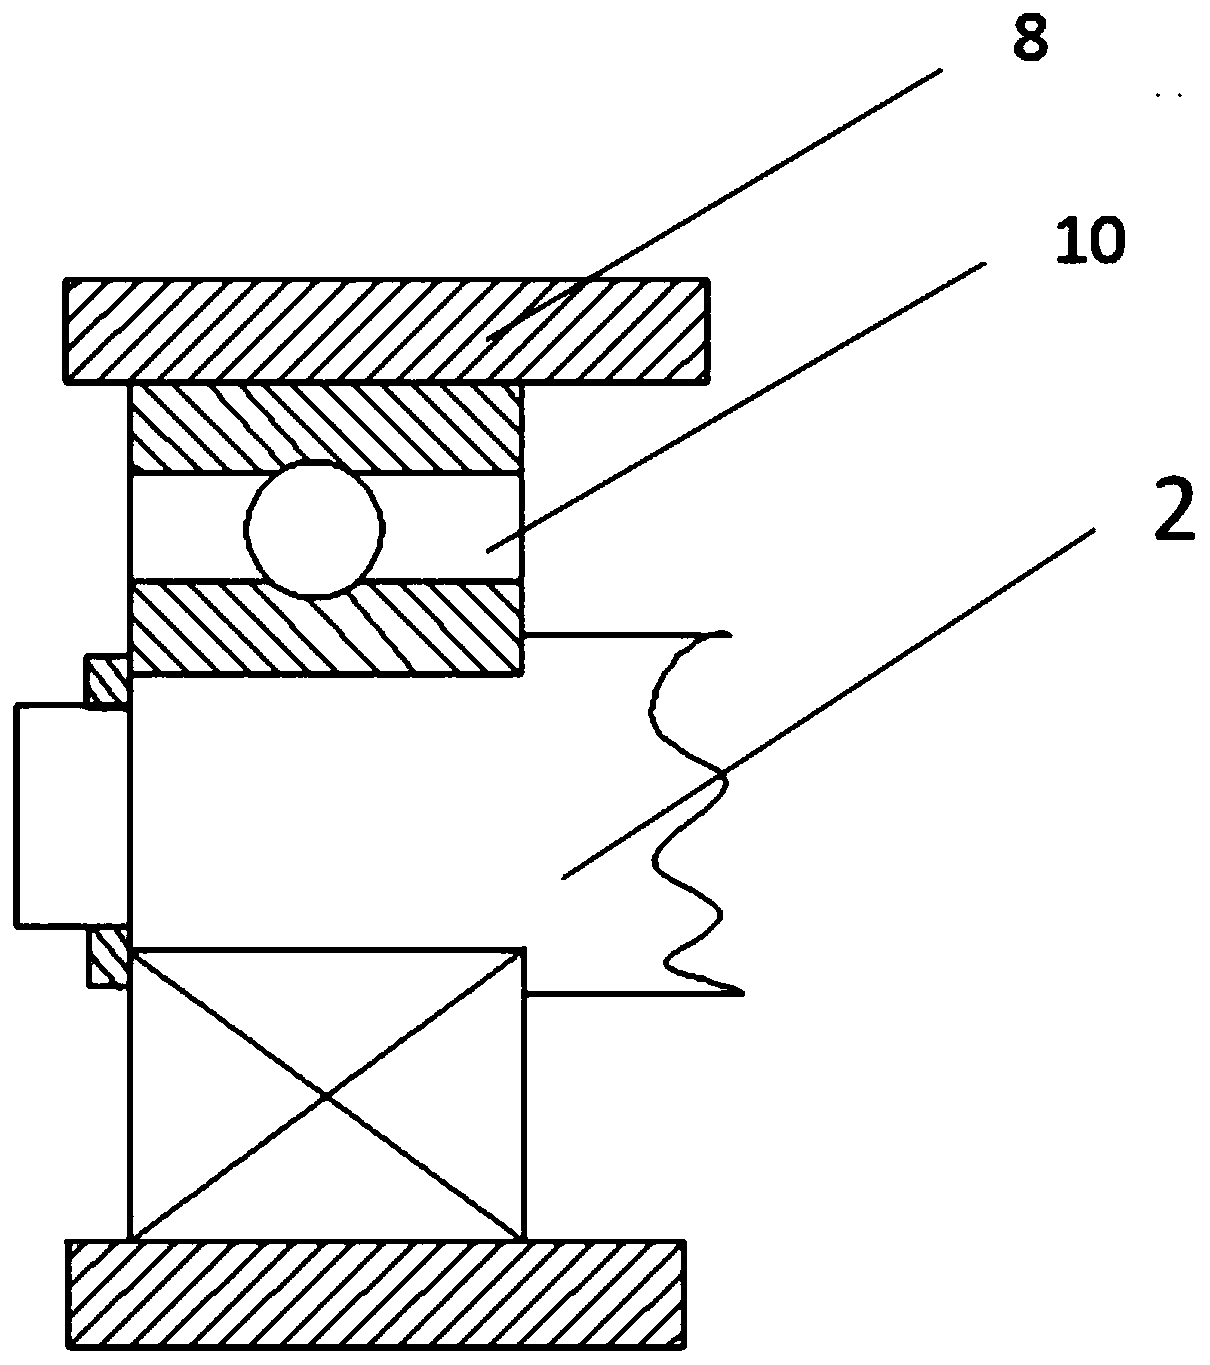 A guided nozzle capable of generating swirling water flow